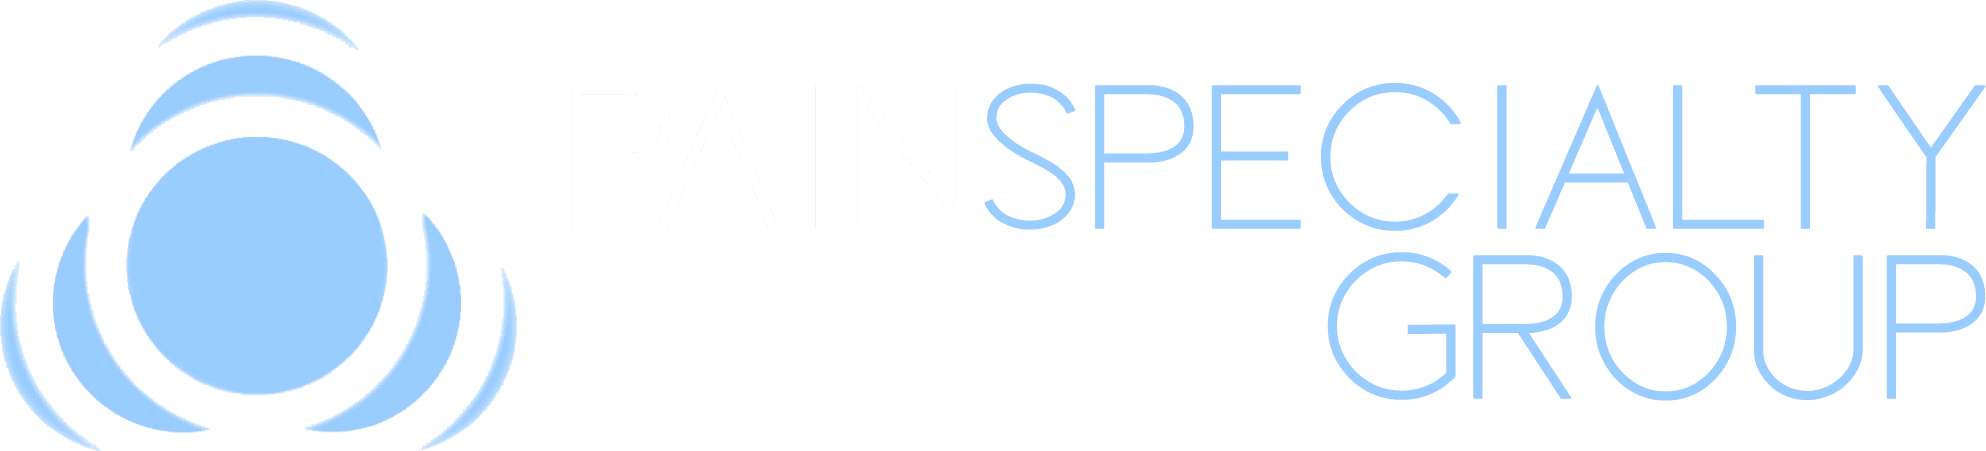 Pain Specialty Group logo